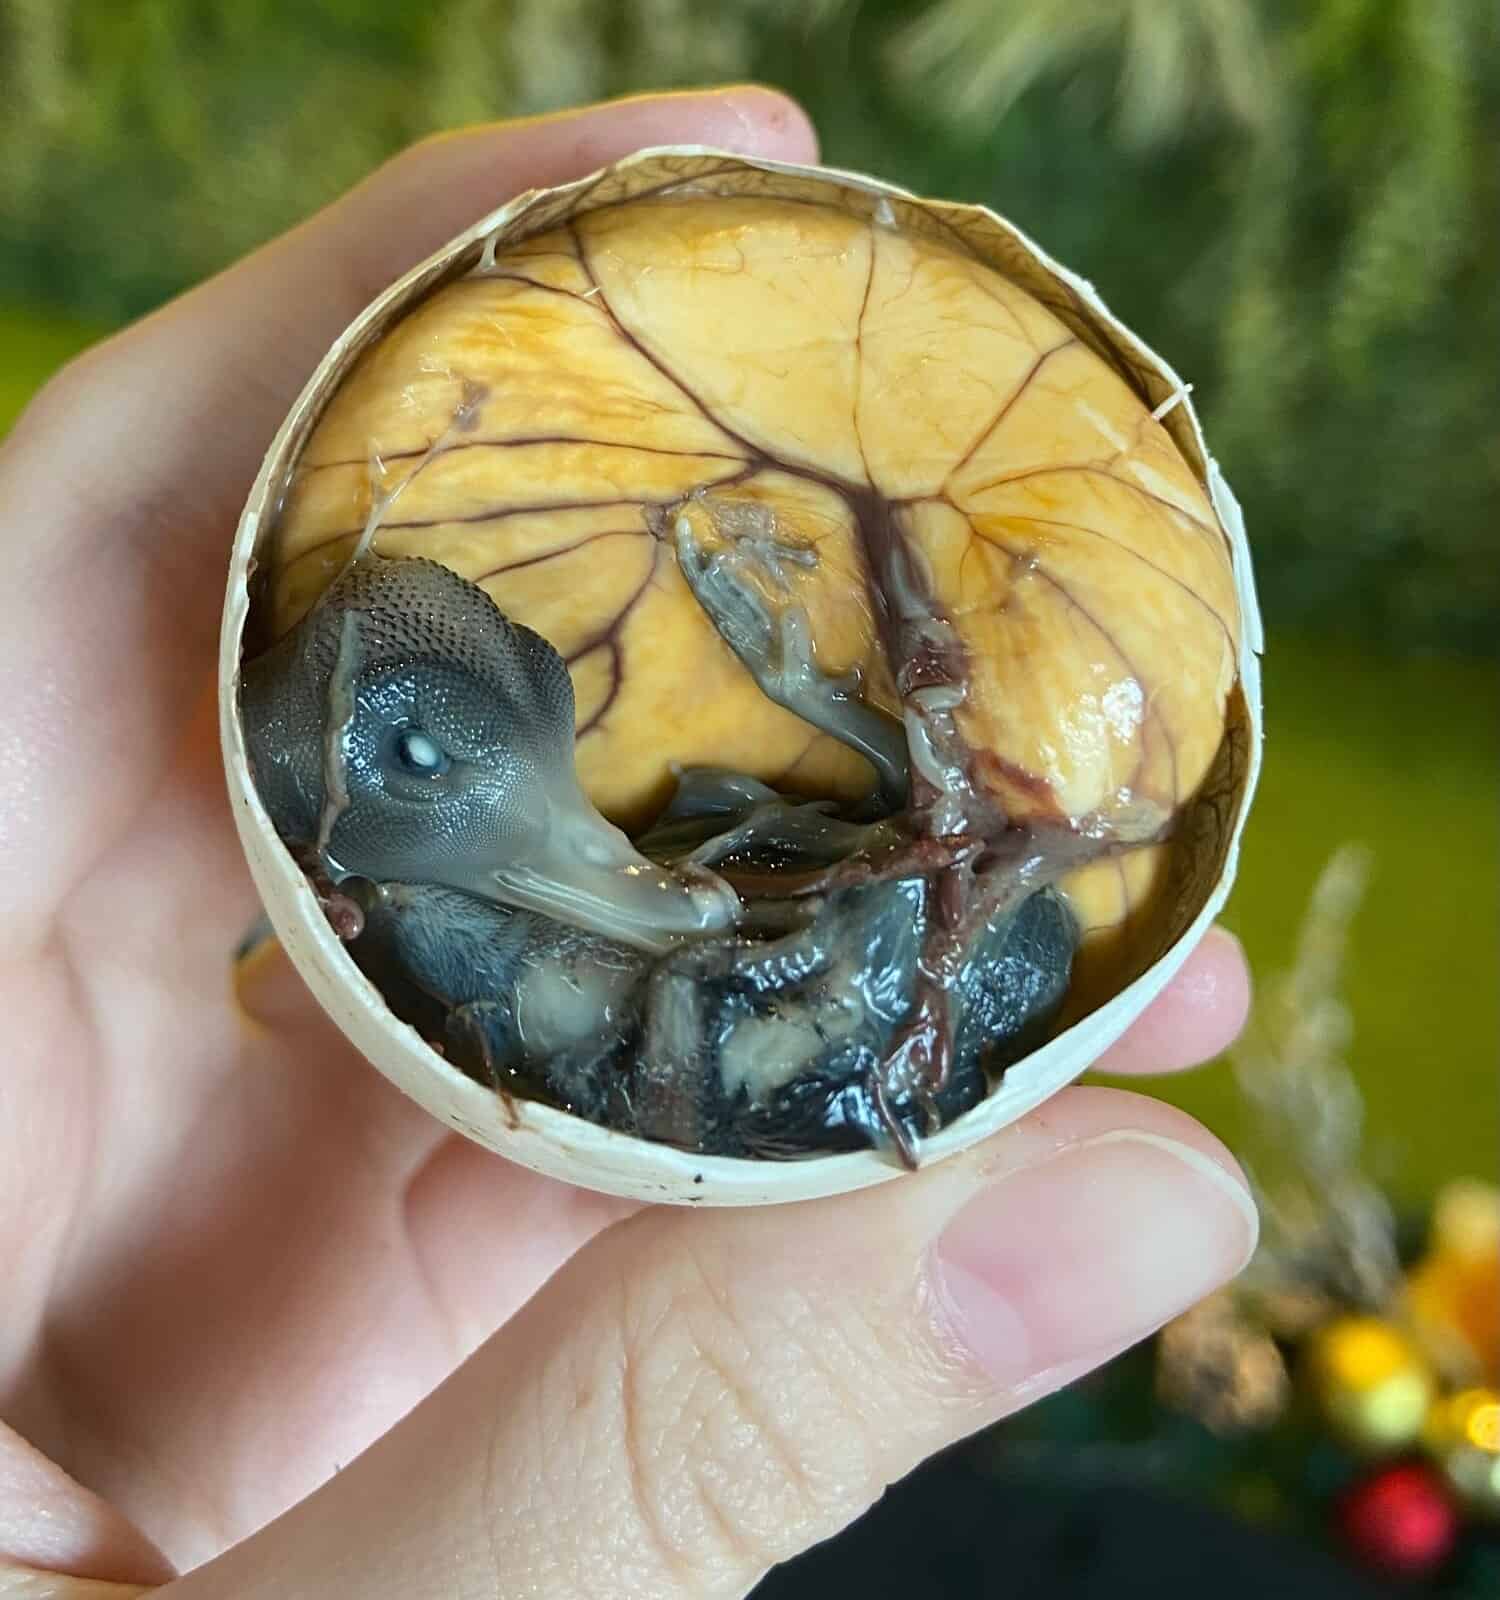 Balut is Phillipines street food , it is a developed embryo. It has soup inside and taste yummy